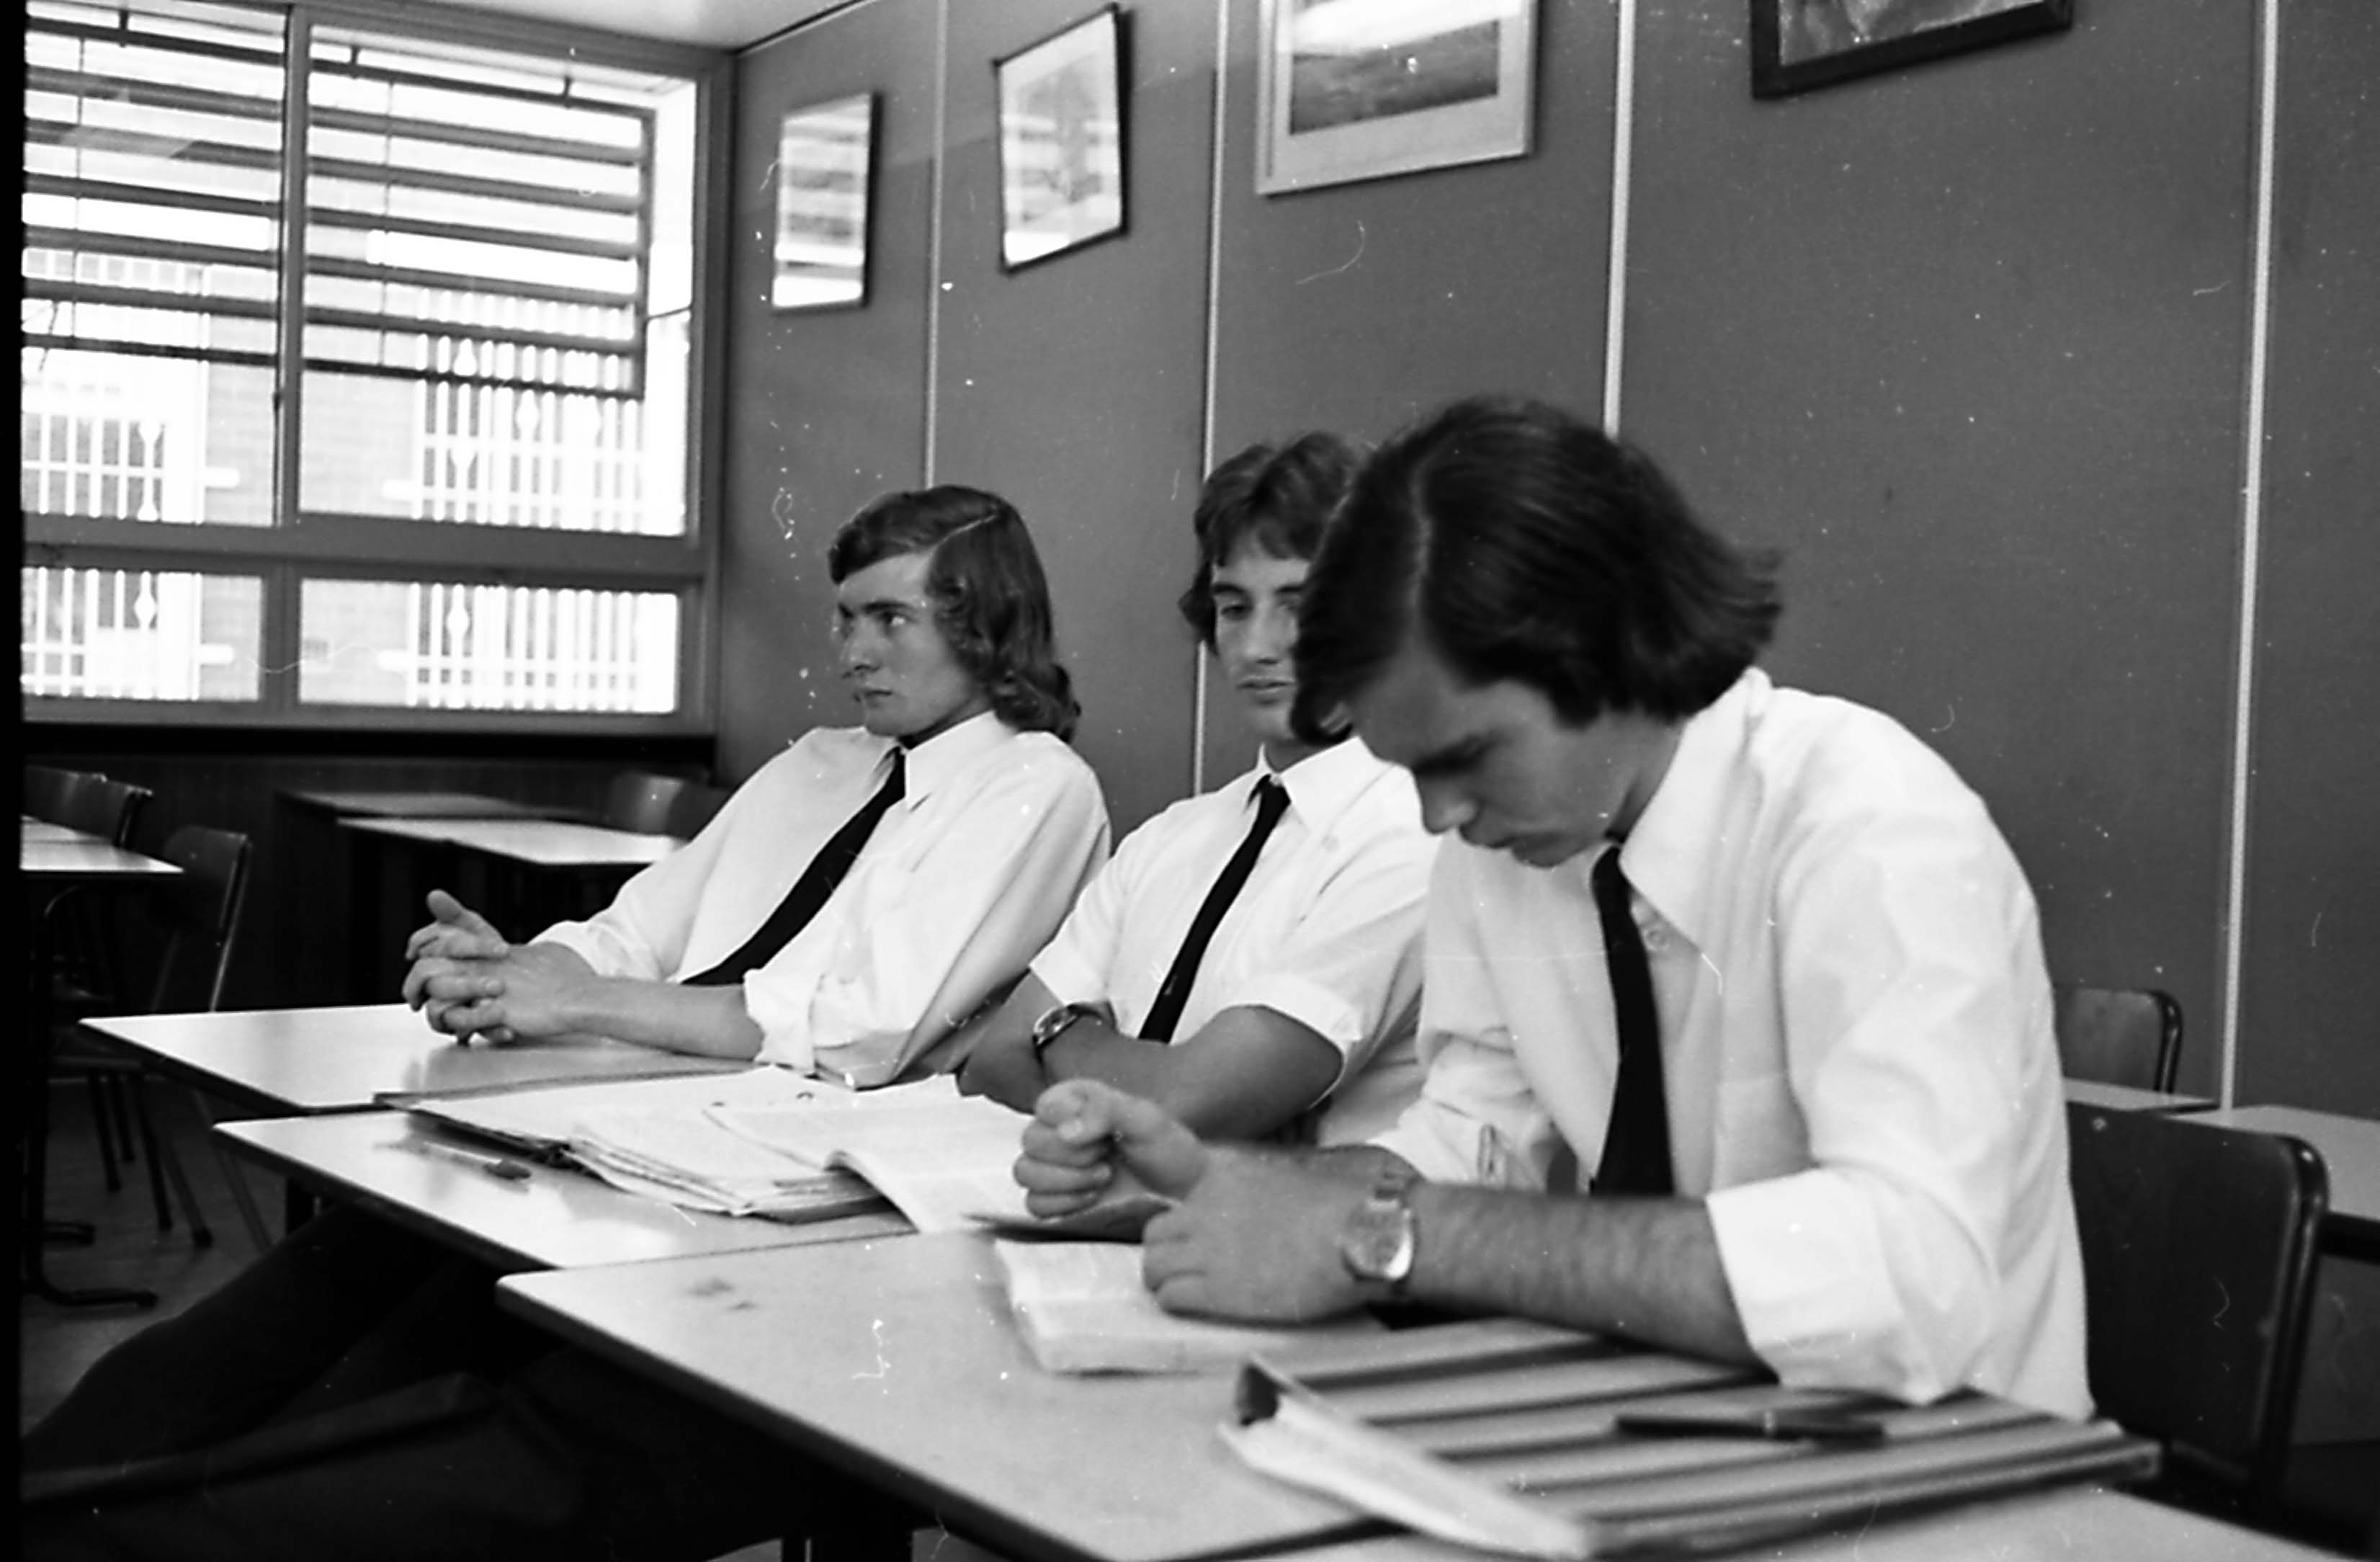 Richard Hayward, Ross Pearson and Ian  Alexander - attentive in class